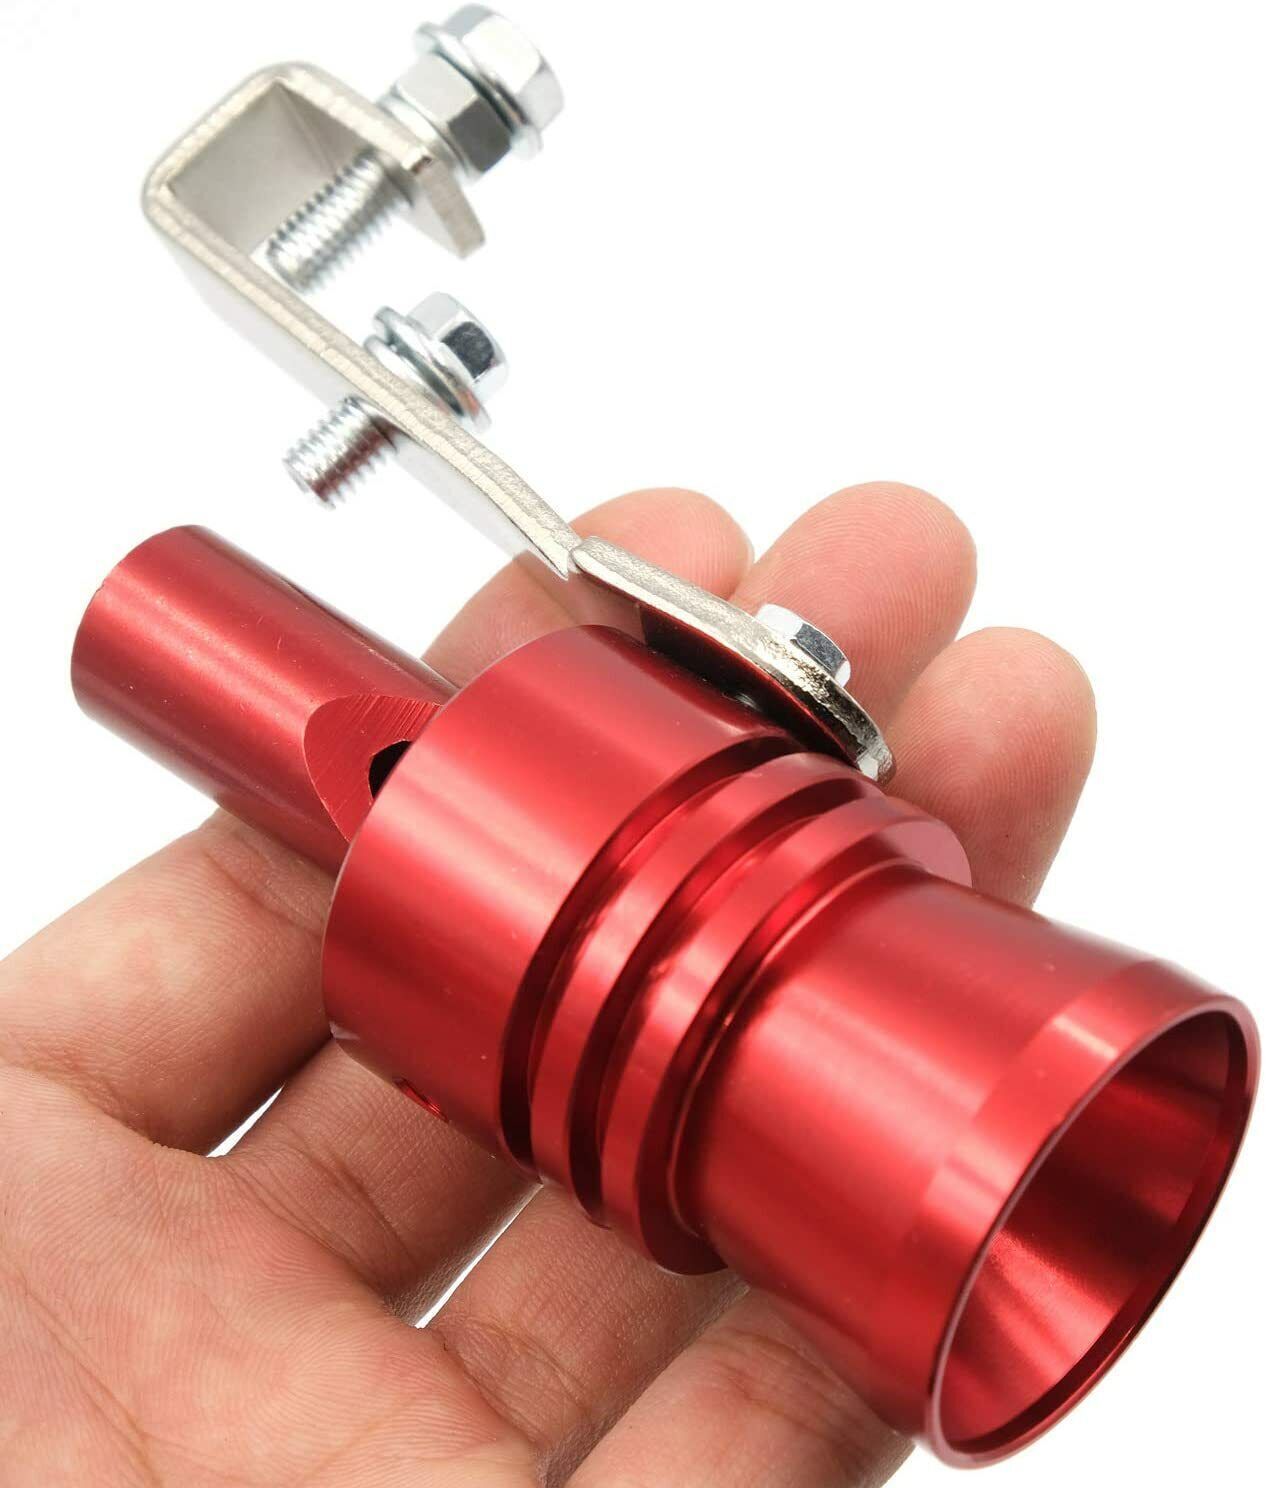 Aluminum Turbo Sound Exhaust Muffler Pipe Whistle Blow off Valve Car Accessories